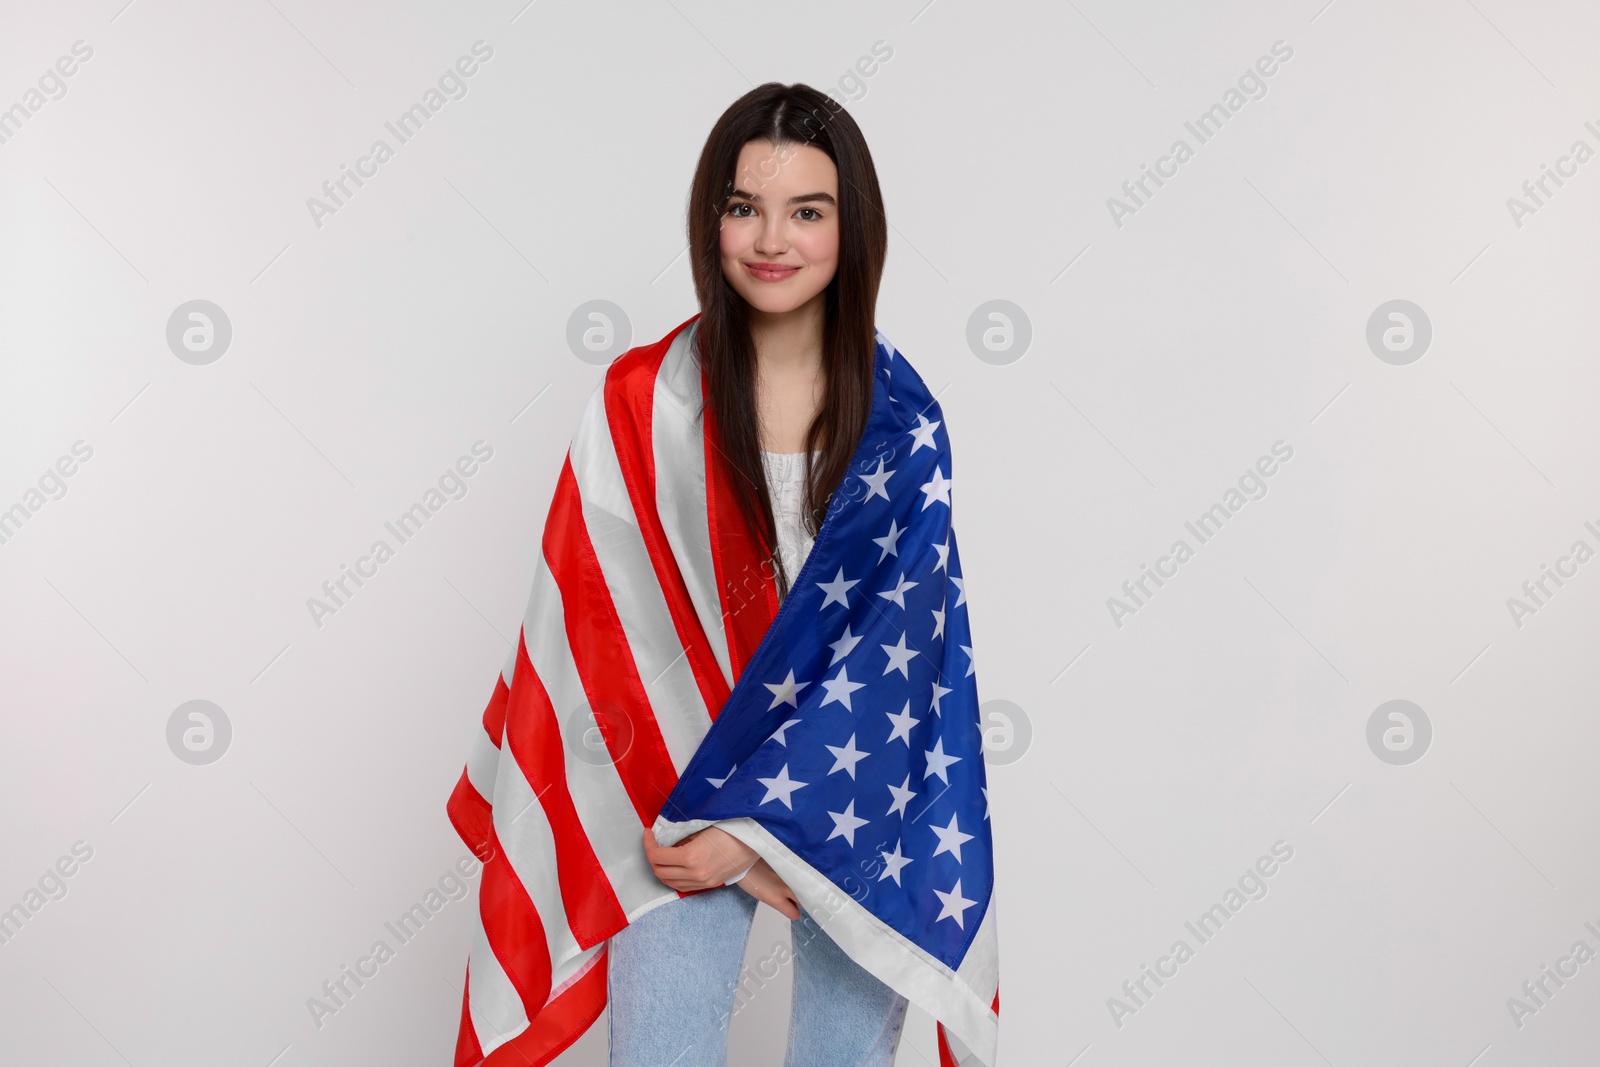 Photo of 4th of July - Independence Day of USA. Happy girl with American flag on white background